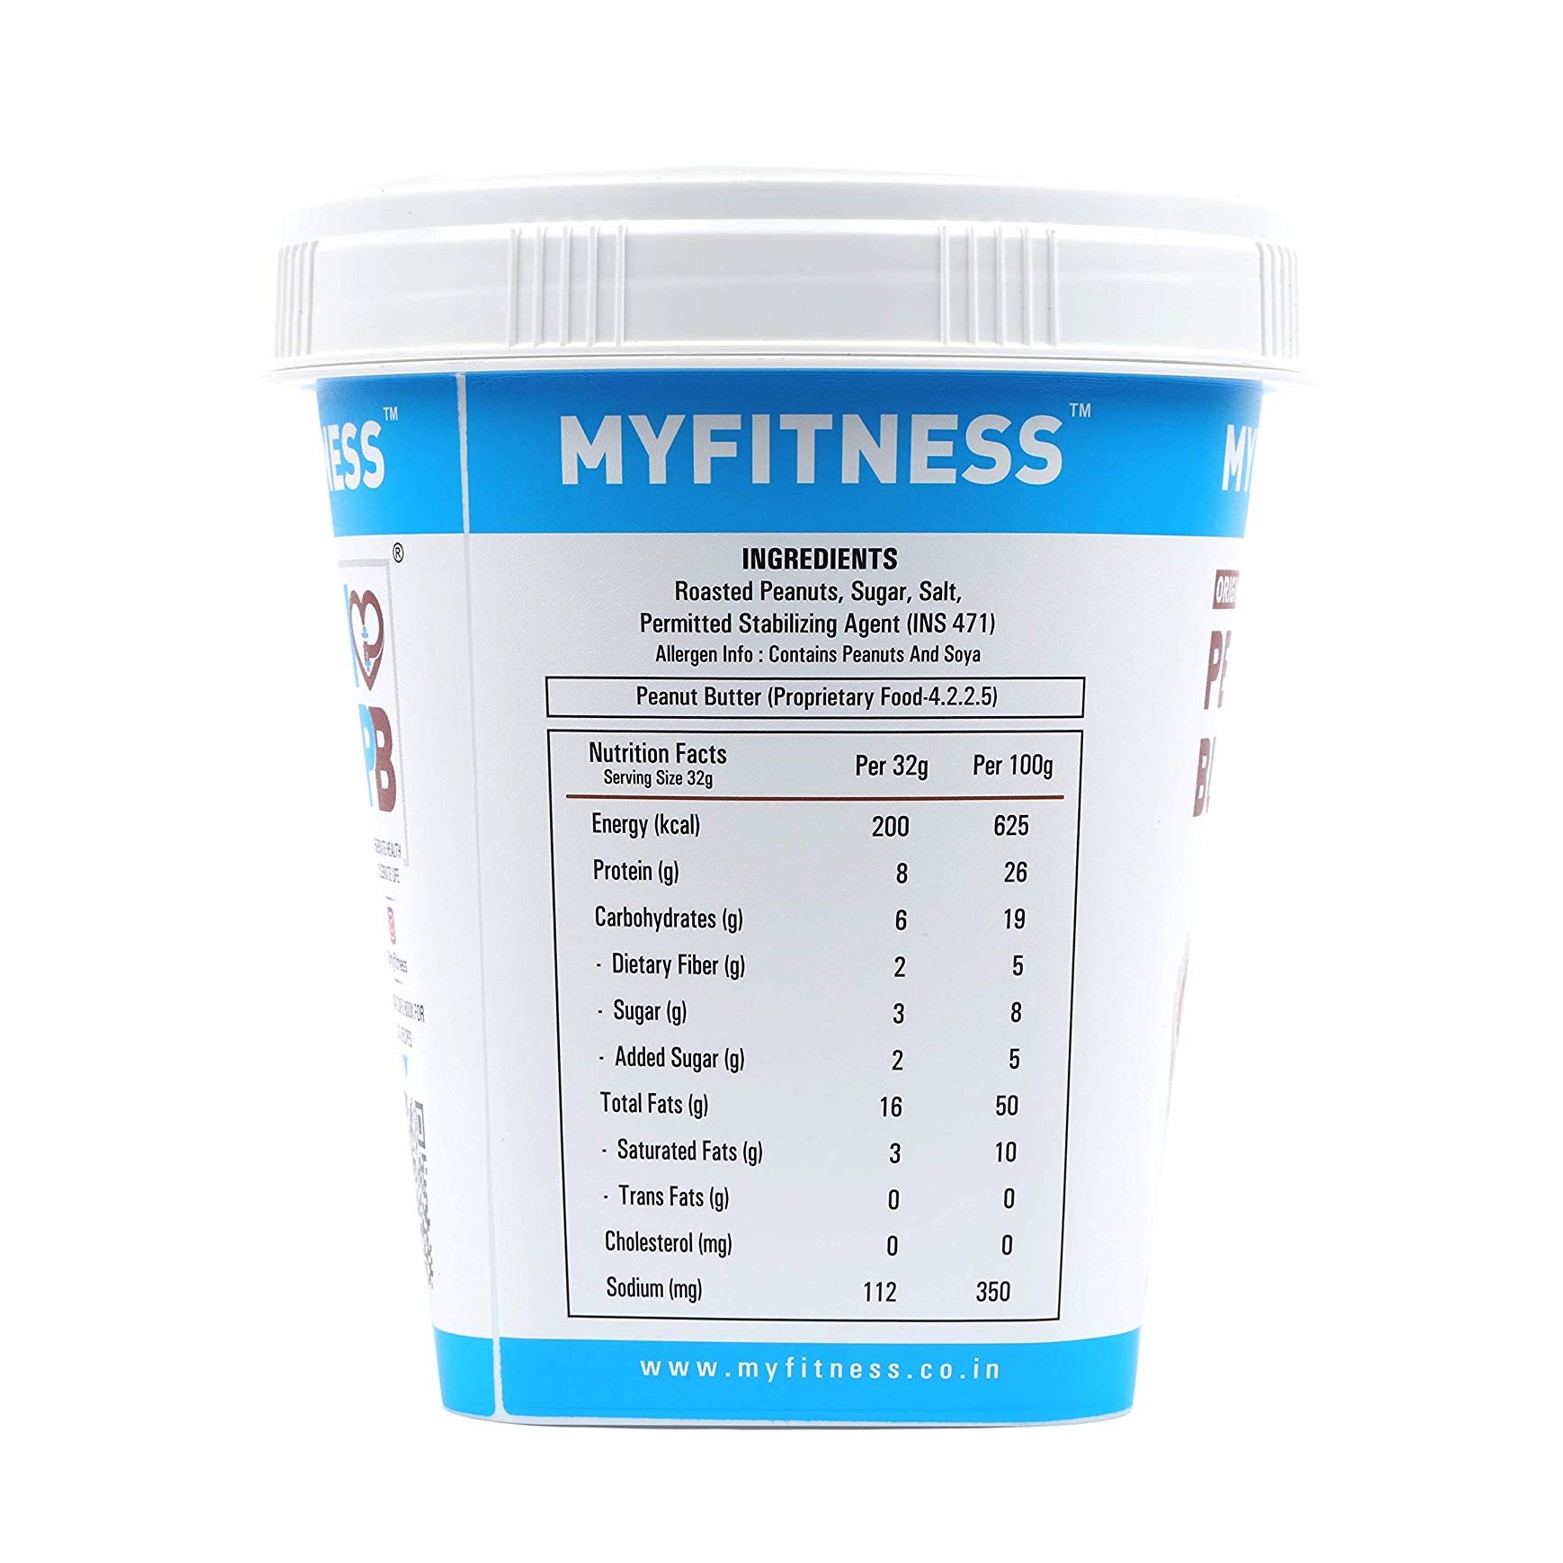 MYFITNESS Peanut Butter Smooth 510g (510g Pack of 2)